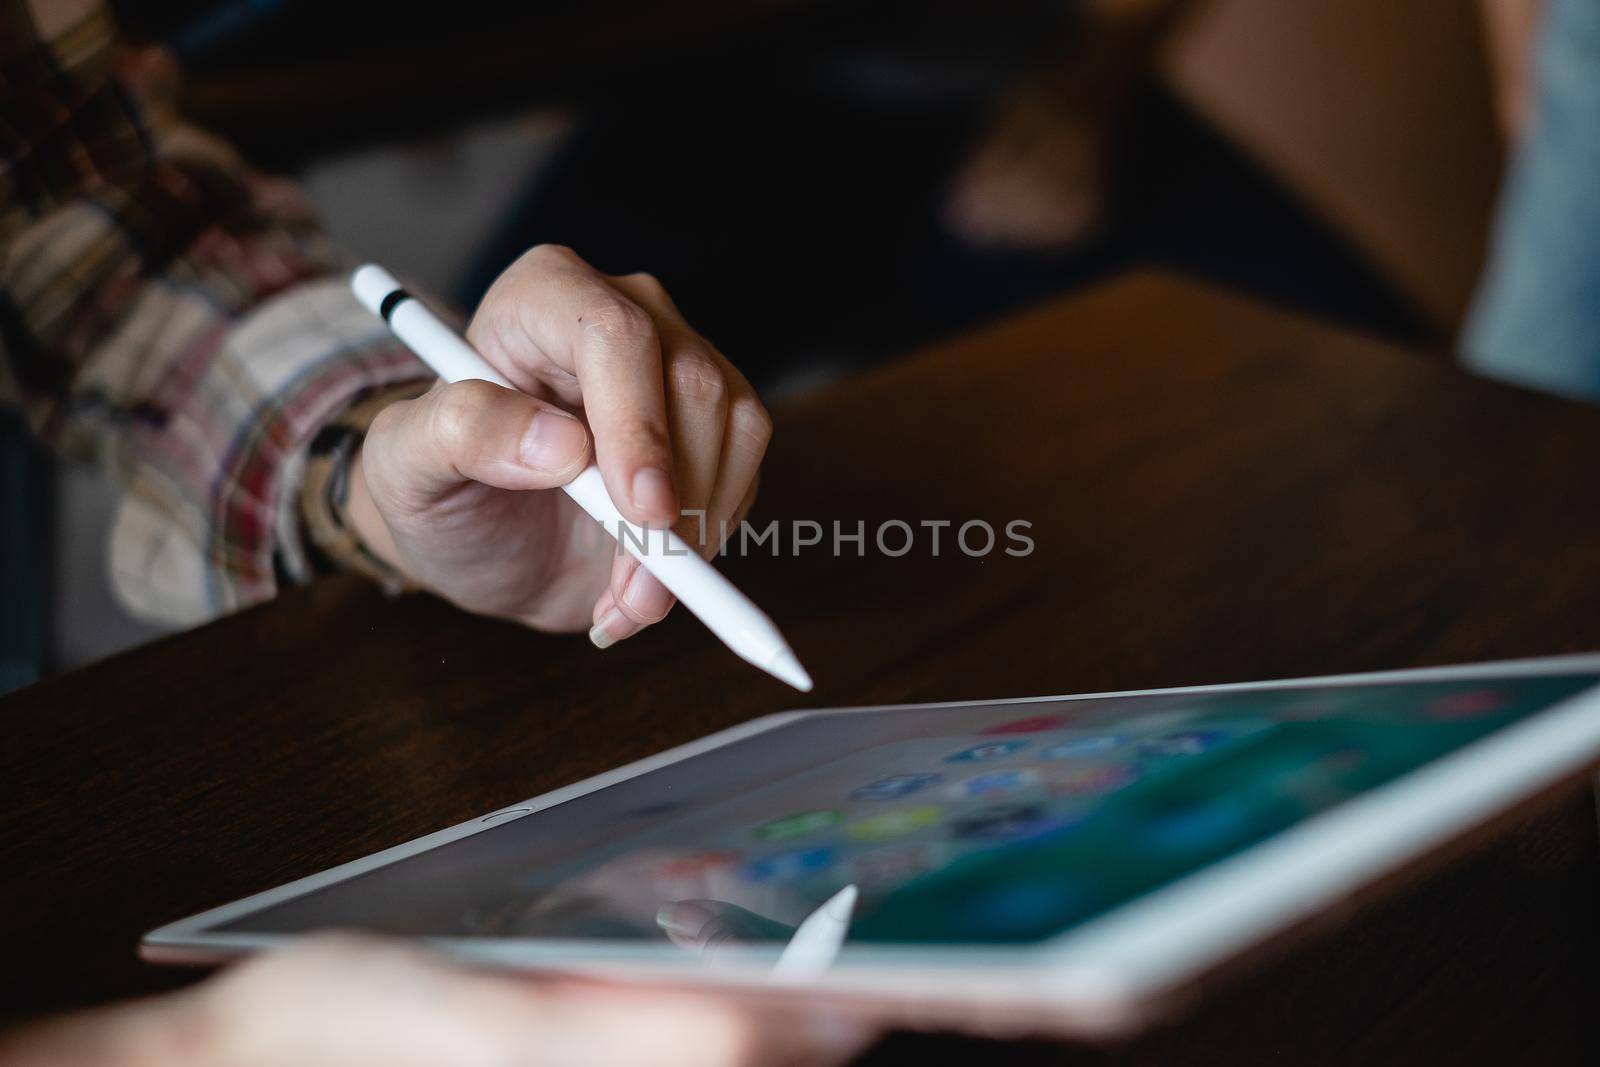 CHIANG MAI, THAILAND - FEB 26, 2020 : Hand of woman using Ipad and pencil with icons of social media on screen, smartphone life style, smartphone era, smartphone in everyday life by itchaznong